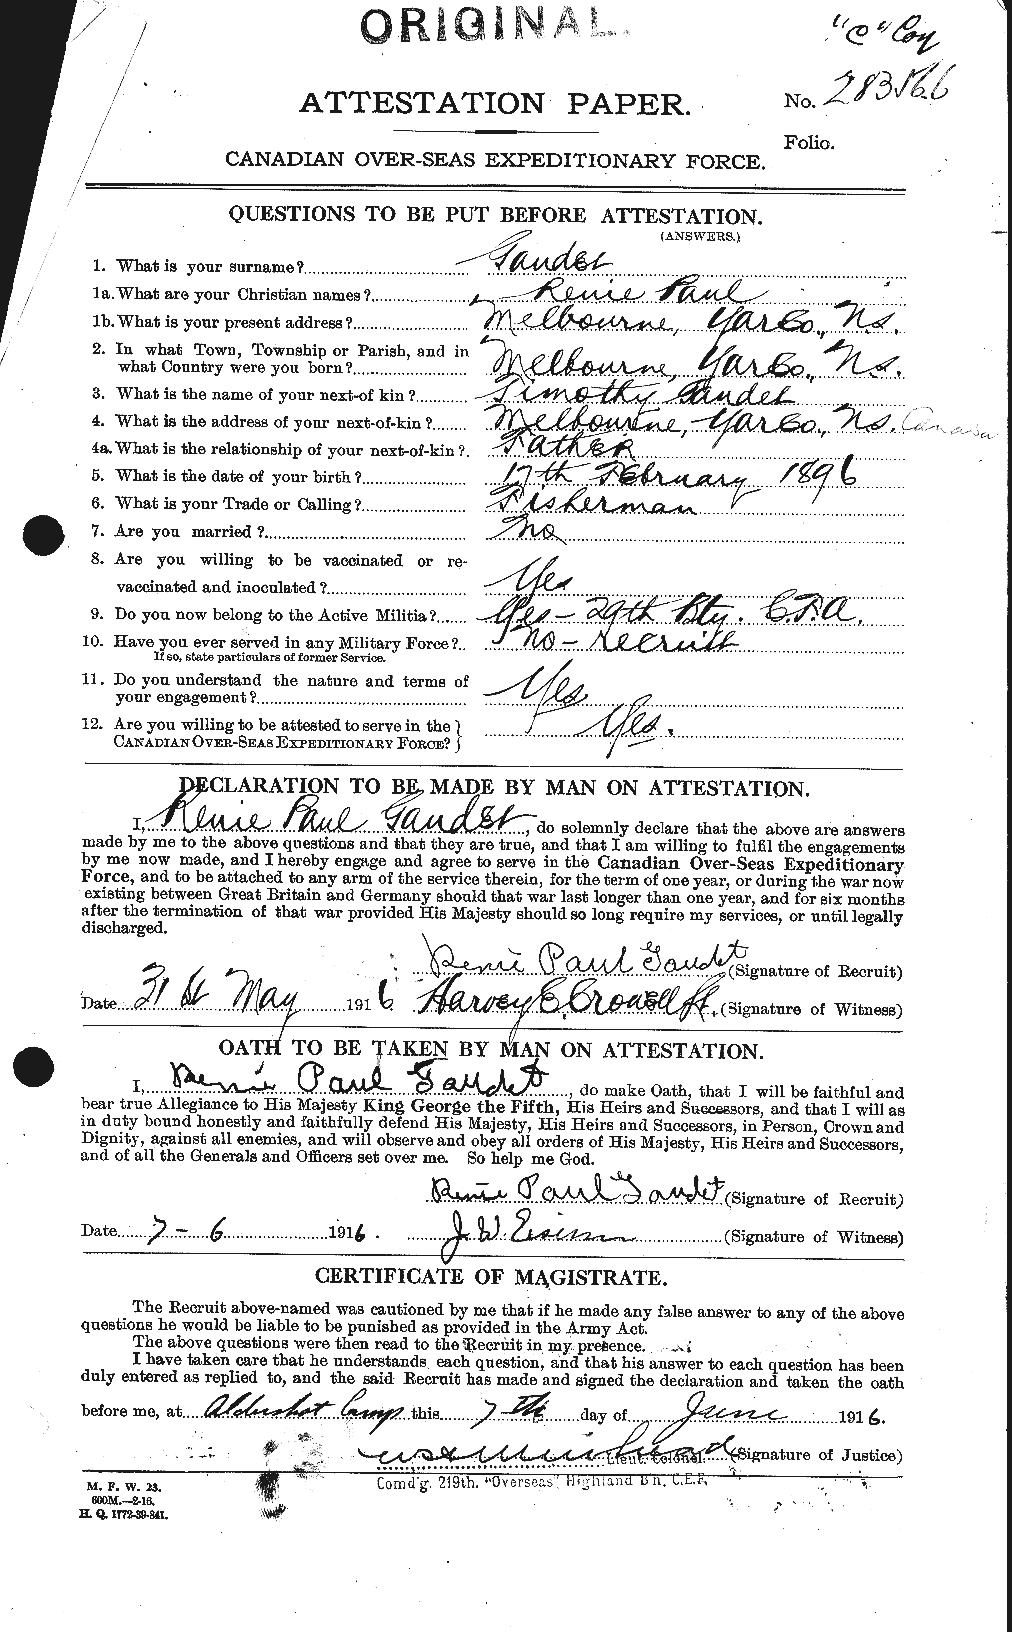 Personnel Records of the First World War - CEF 343120a